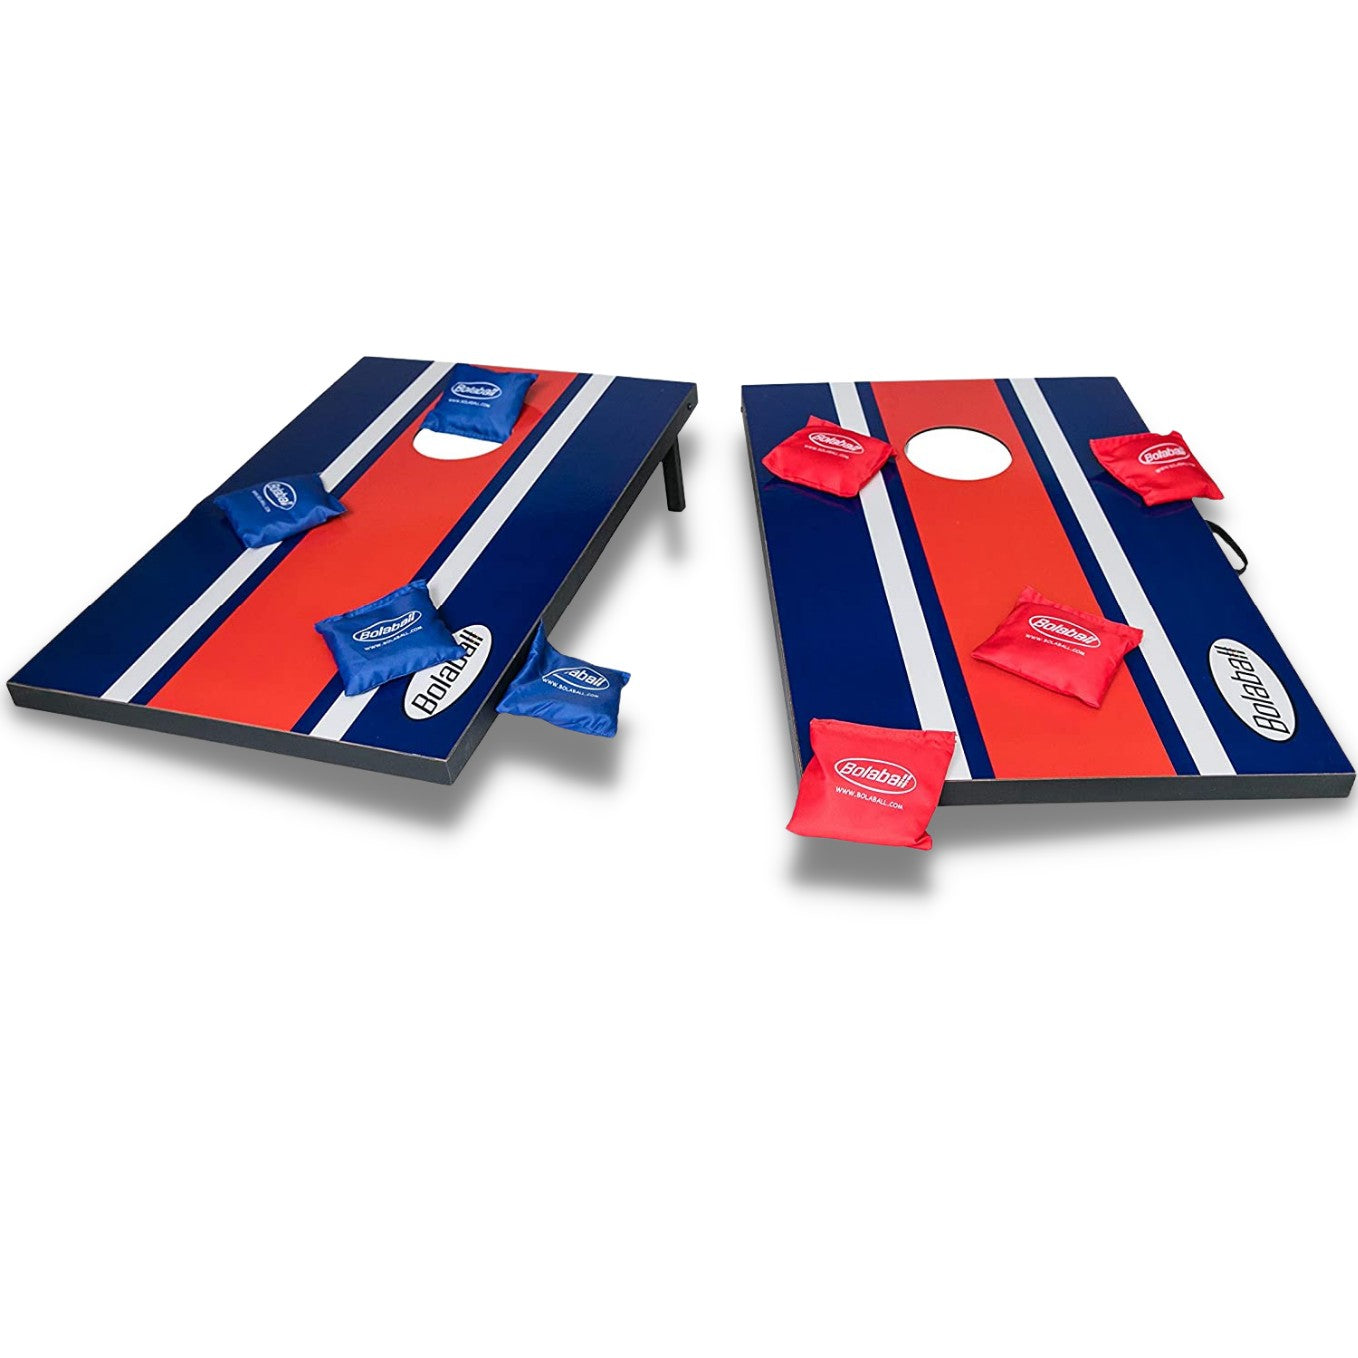 Cornhole Game Set | 8 Bean Bags Set | Indoor and Outdoor Toss Game